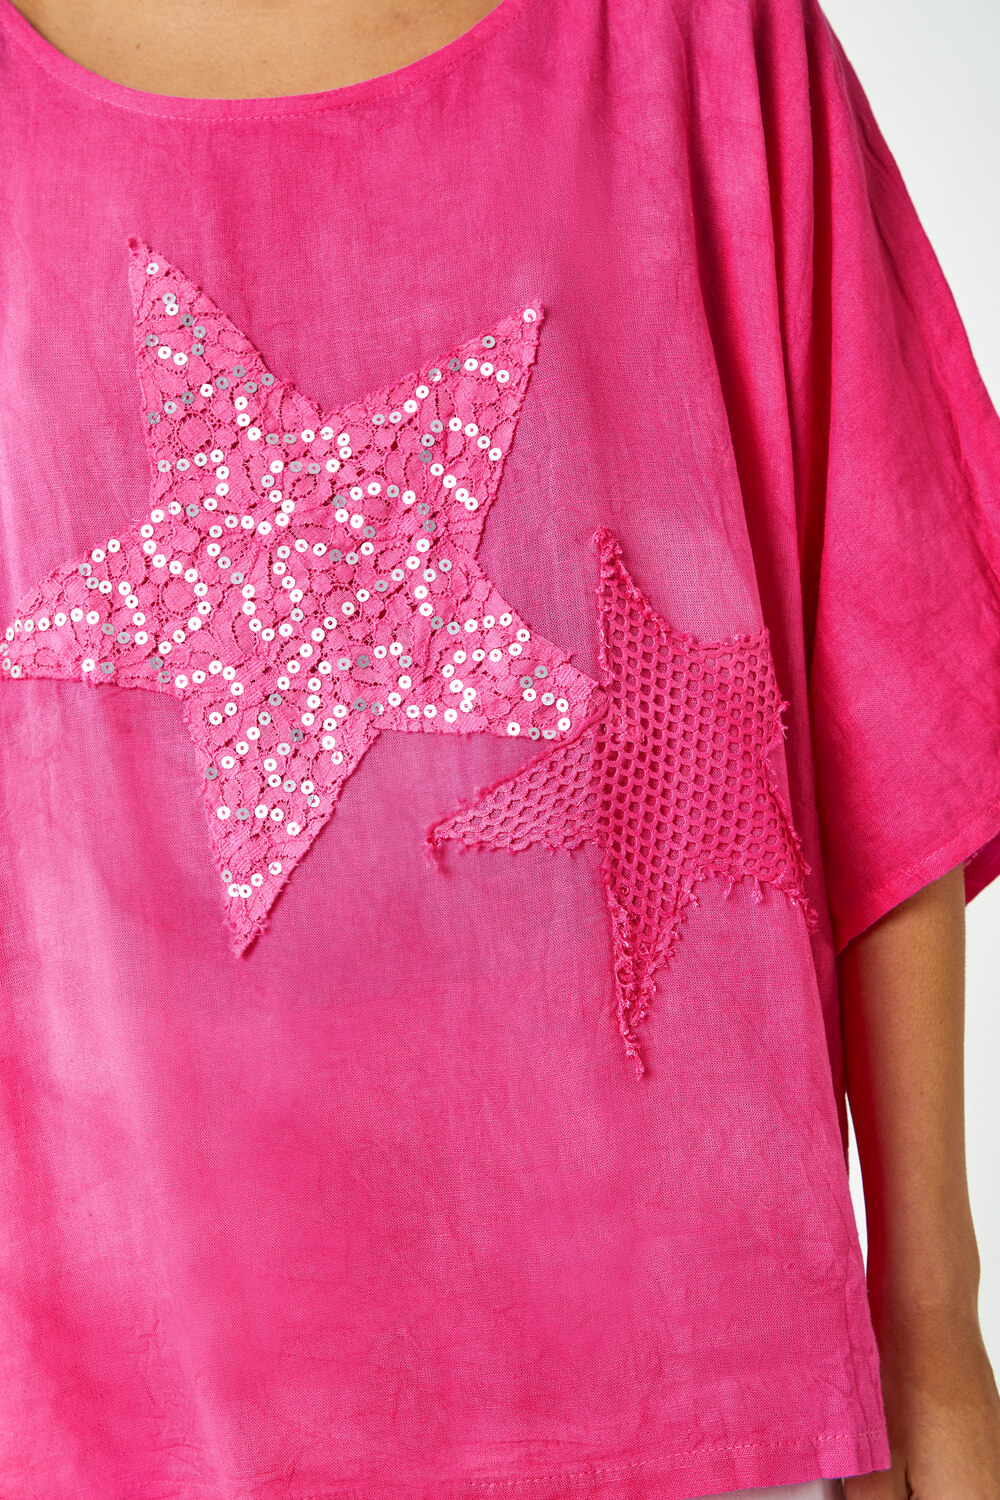 PINK Sequin Star Print Tunic Top , Image 5 of 5